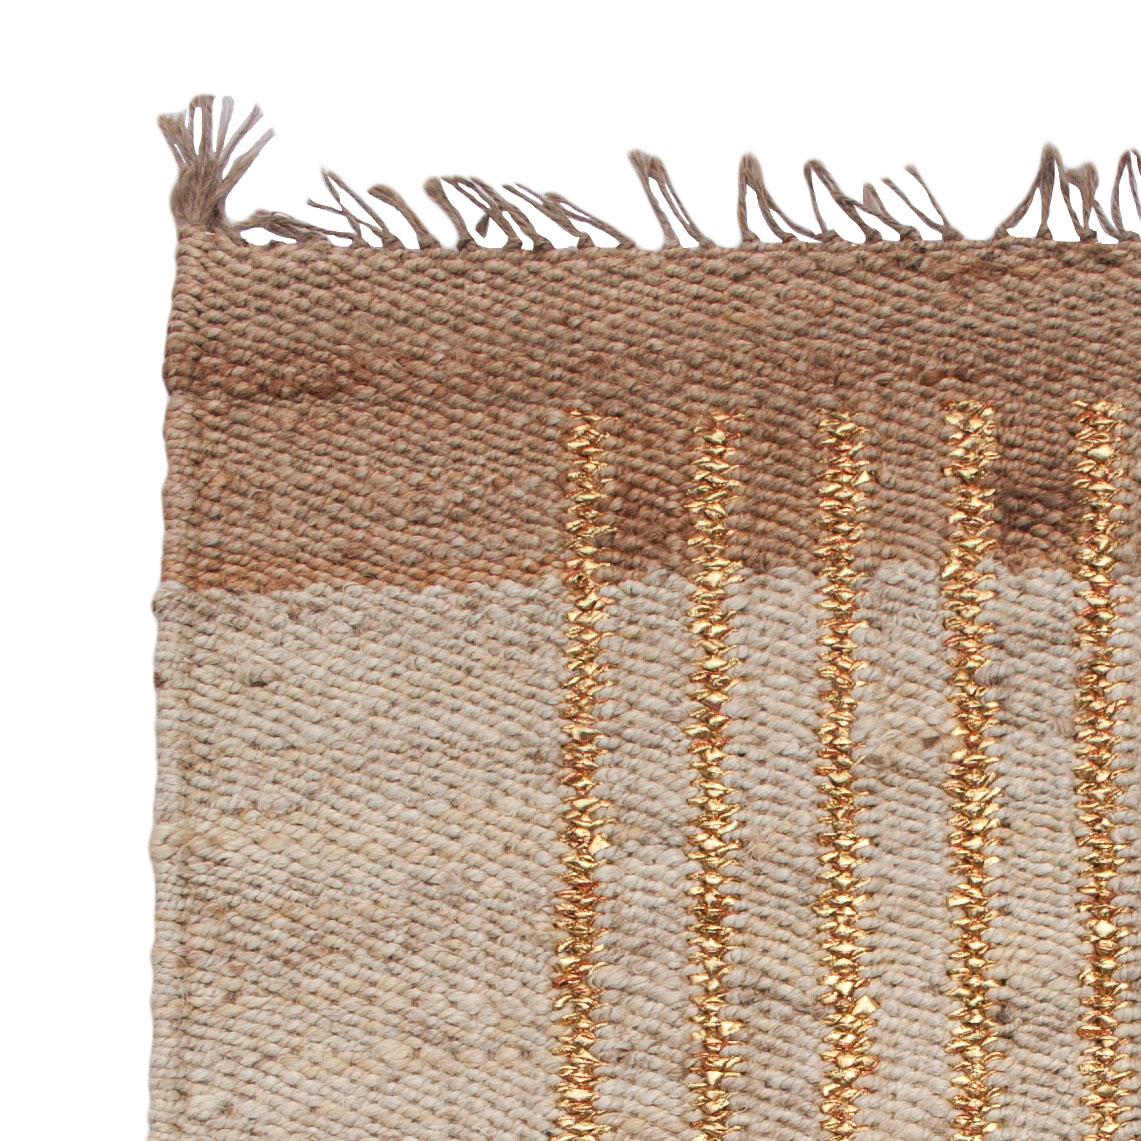 This rug has been handwoven in the finest jute yarns by artisans in Rajasthan, India, using a traditional weaving technique which is native to this region.

The purchase of this handcrafted rug helps to support the artisans and preserve their